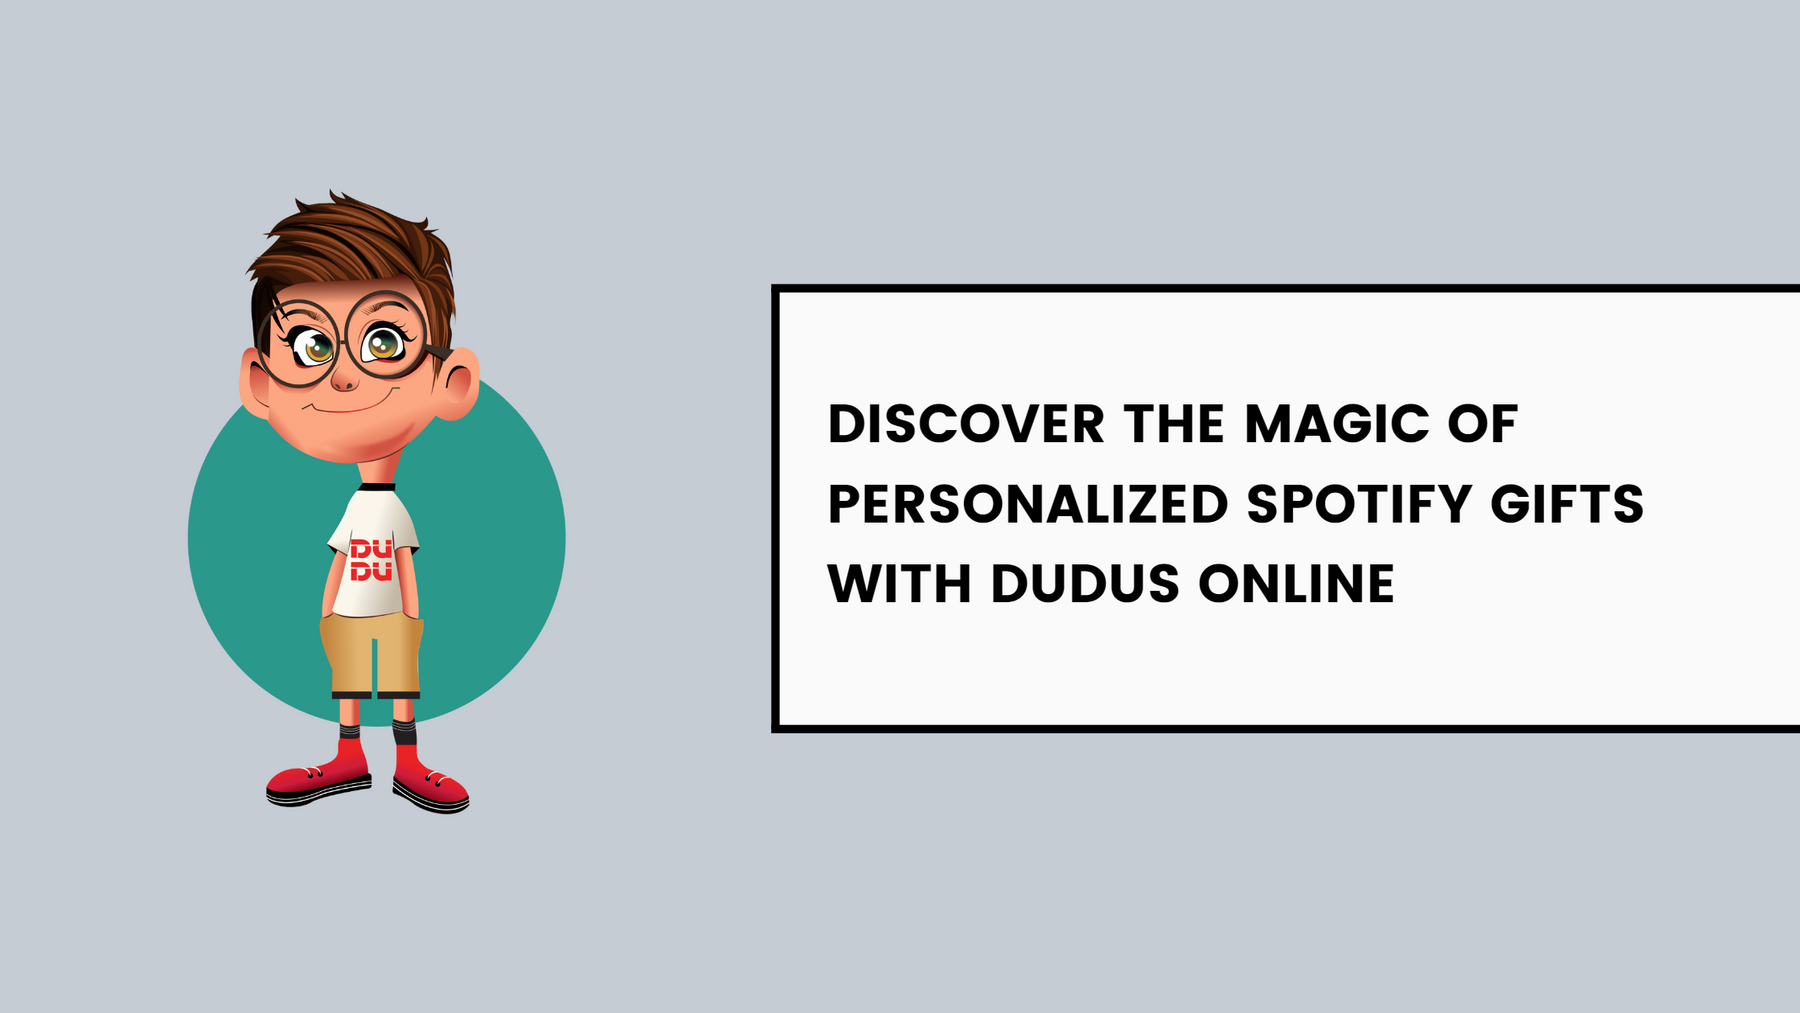 Discover The Magic Of Personalized Spotify Gifts With Dudus Online